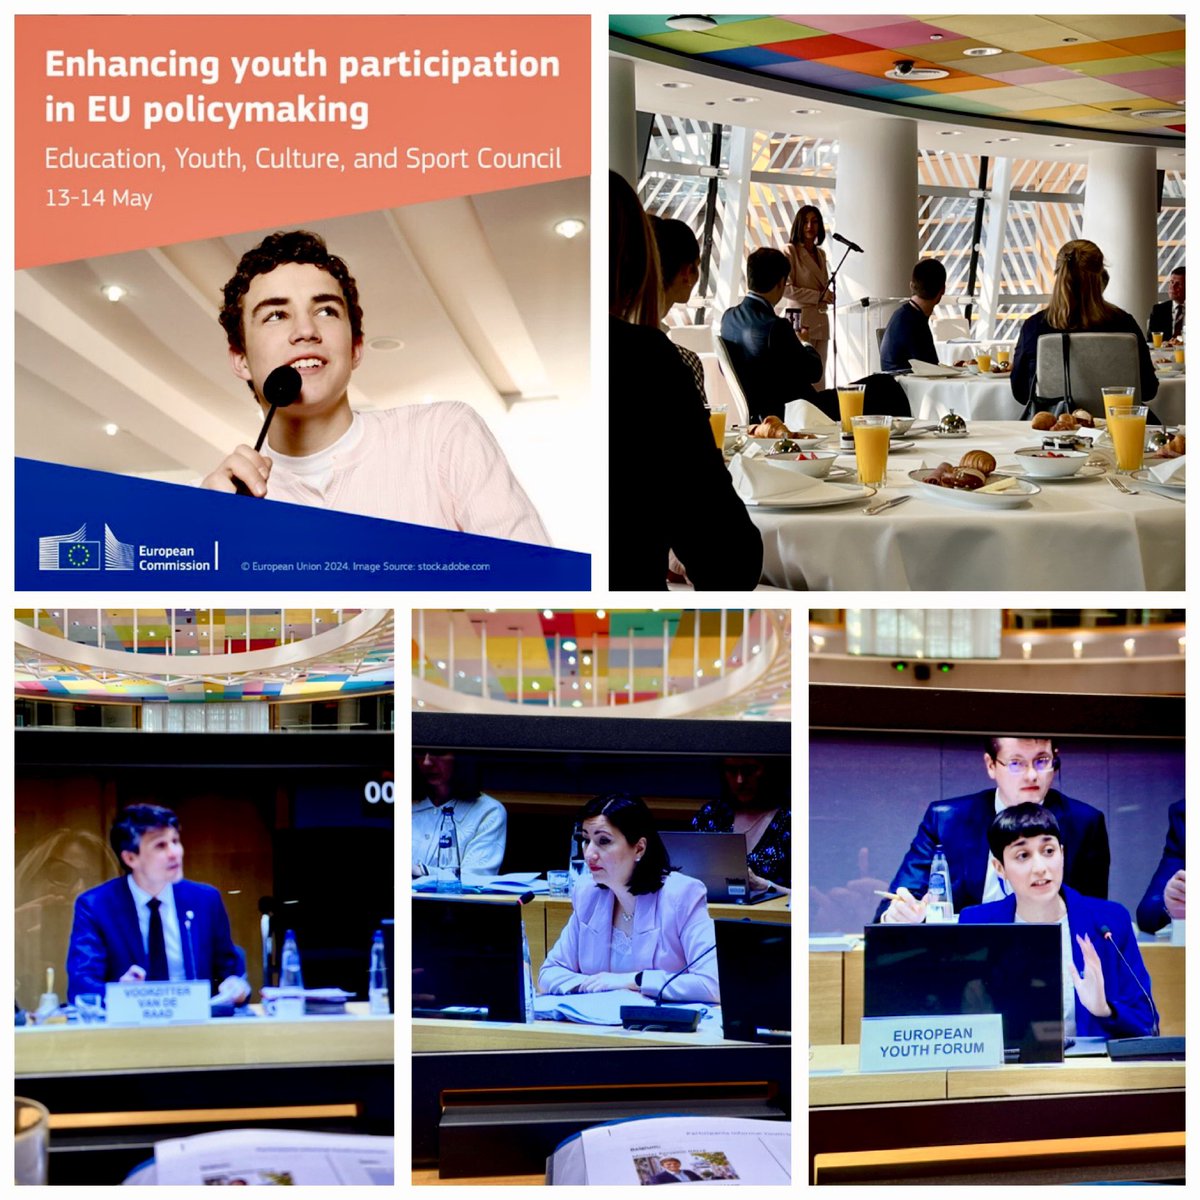 🇪🇺The EYCS @EUCouncil is in full swing after informal kick-off breakfast with youth representatives this morning. 🇪🇺In focus: Strong & meaningful youth participation in #EUElections & beyond! 🇪🇺Stay tuned for the latest #Eurobarometer on Youth & Democracy going out today.